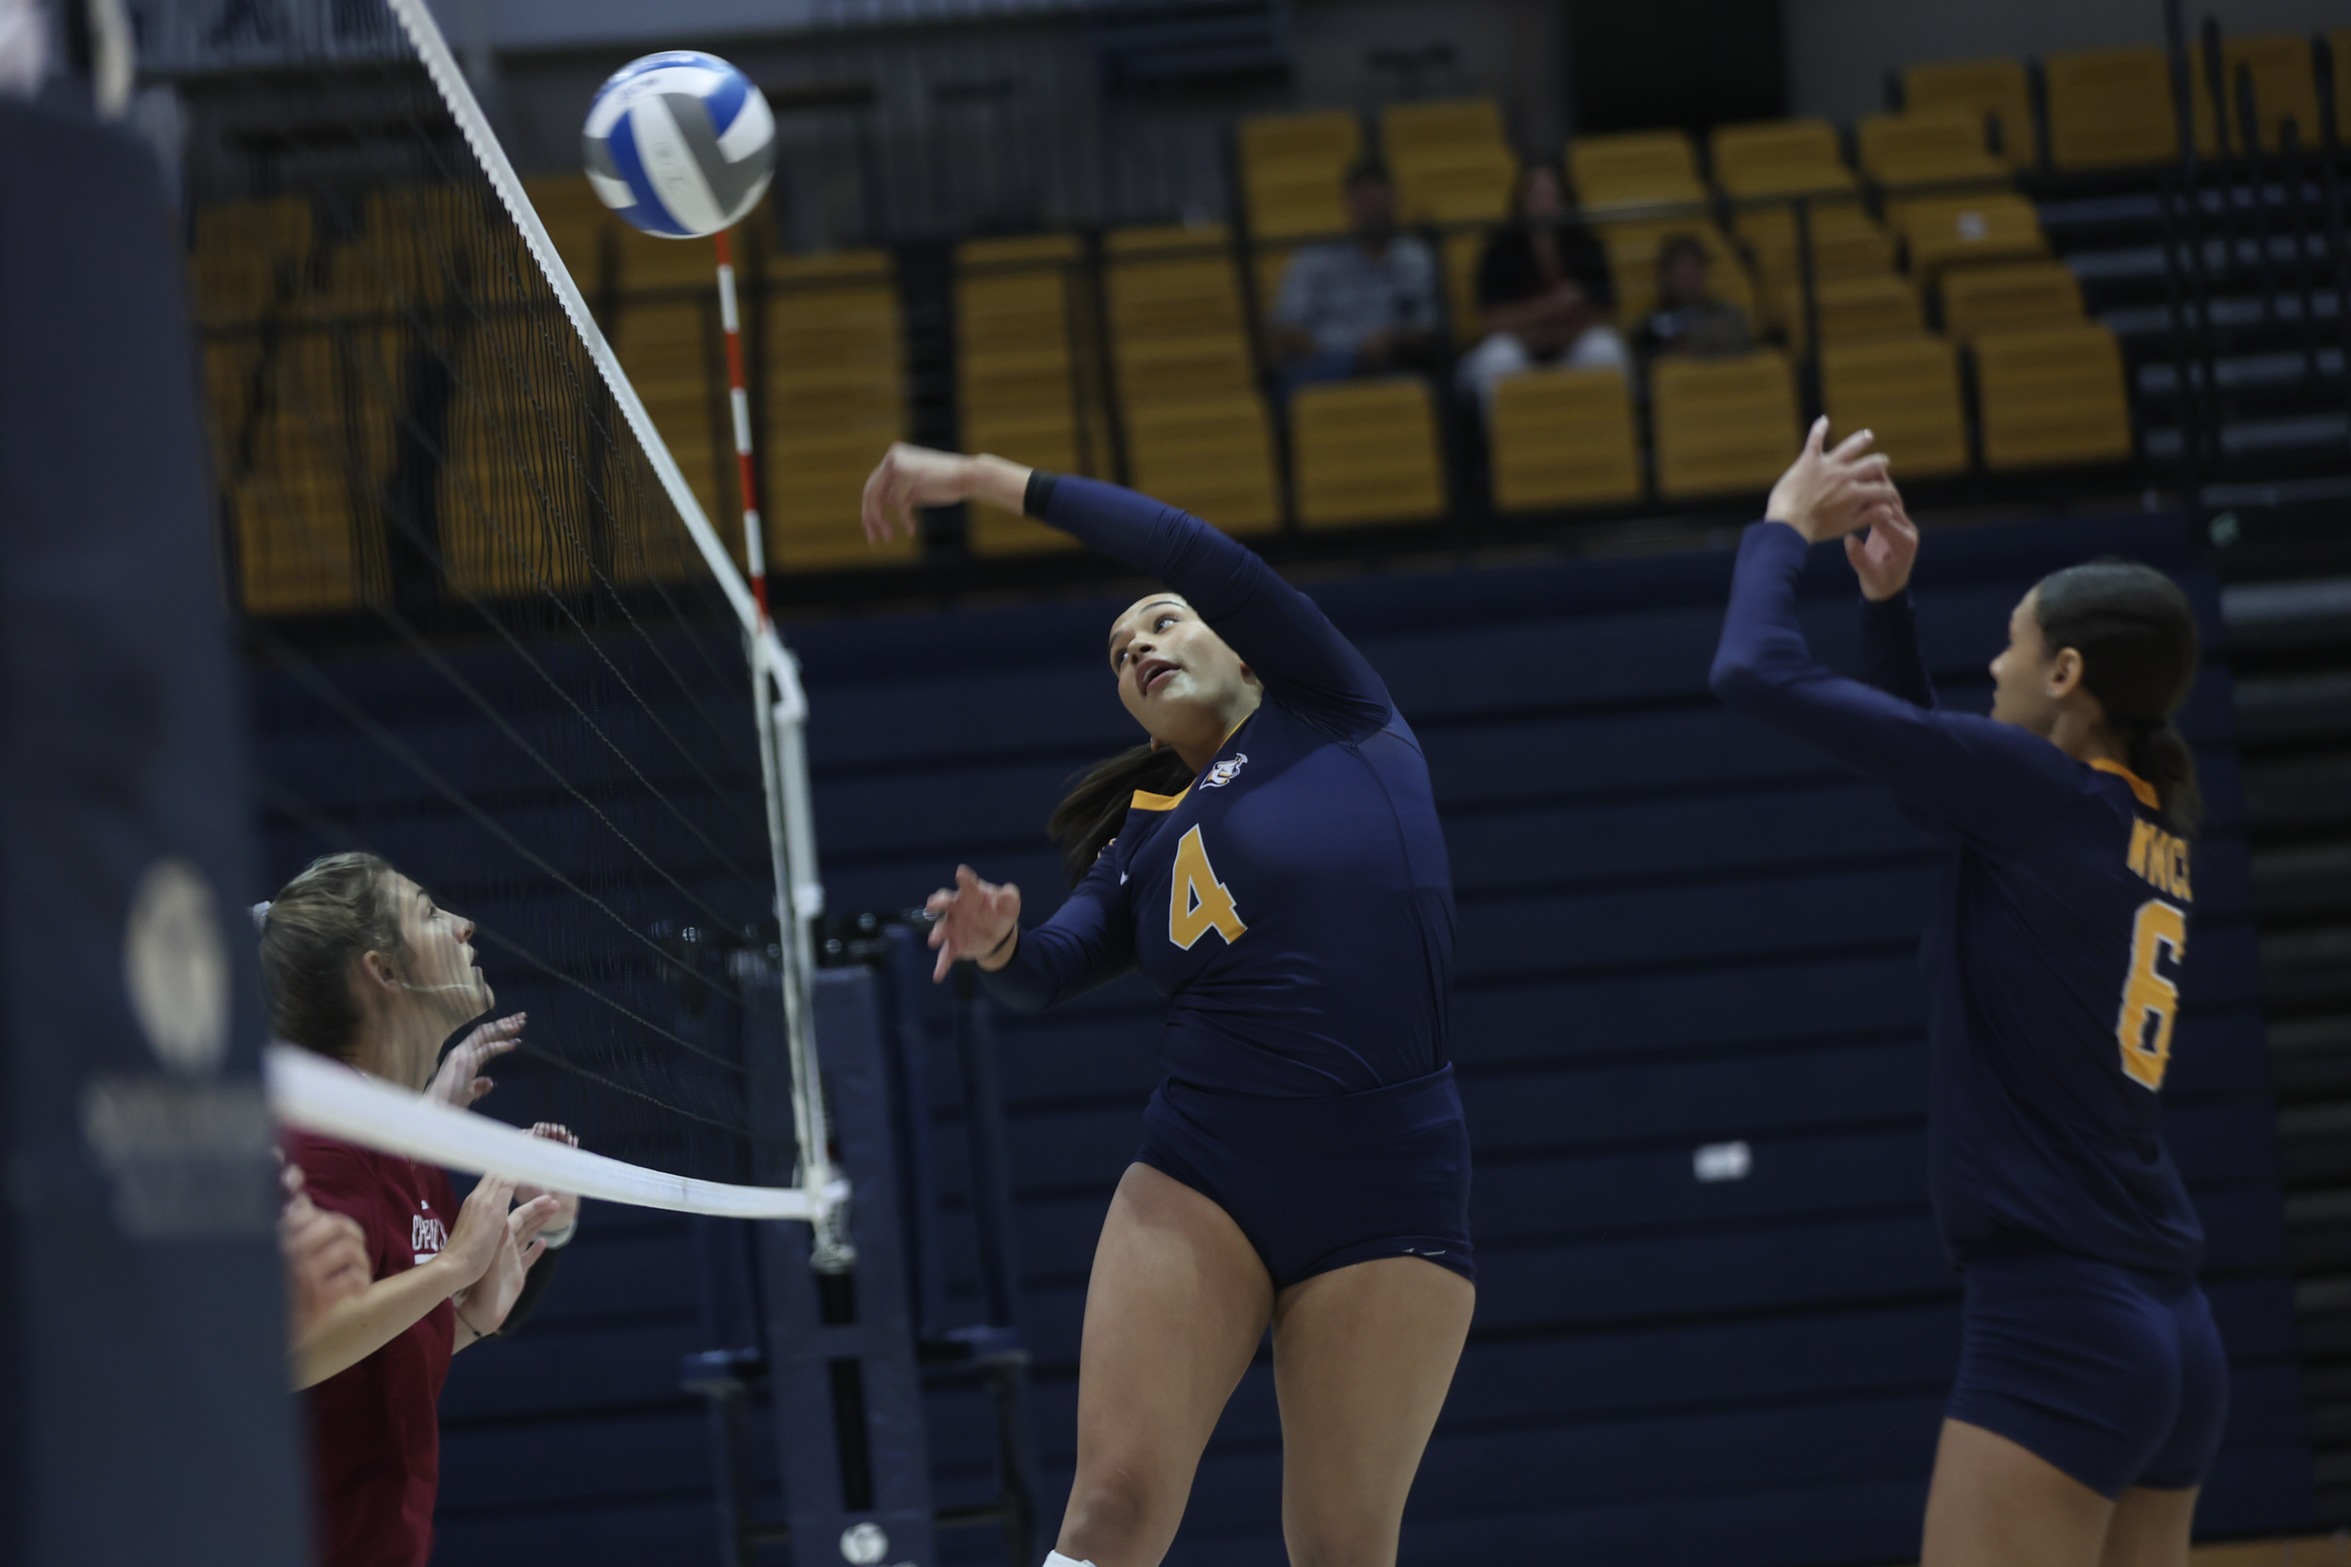 Shanelle Martinez throws the ball over the net during a scrimmage last week.